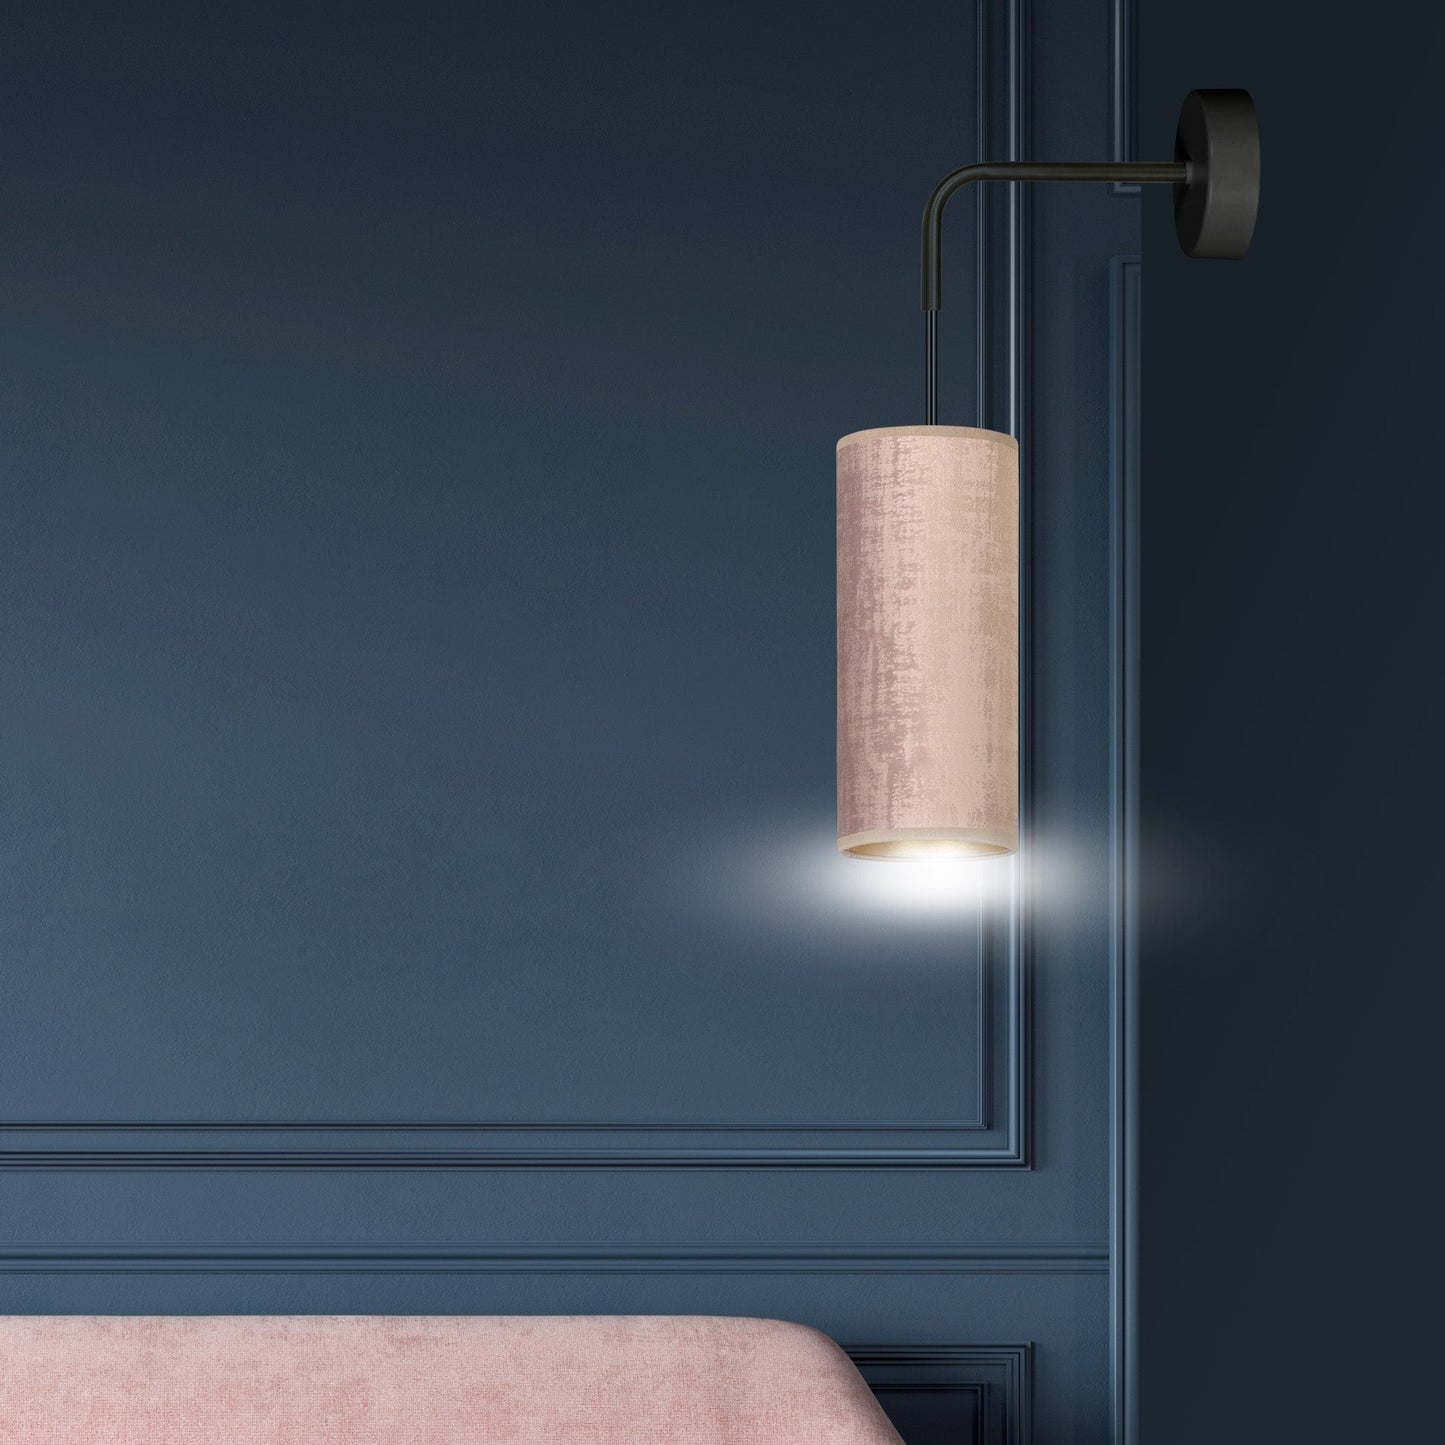 Our Bente wall light is modern and contemporary in its design which is inspired by the industrial trend with a touch of opulence. The velvet effect shade is made from a luxury pink rose fabric creating a stand out feature for any wall in your home. The cable is adjustable up to 100cm to suit your desired look.